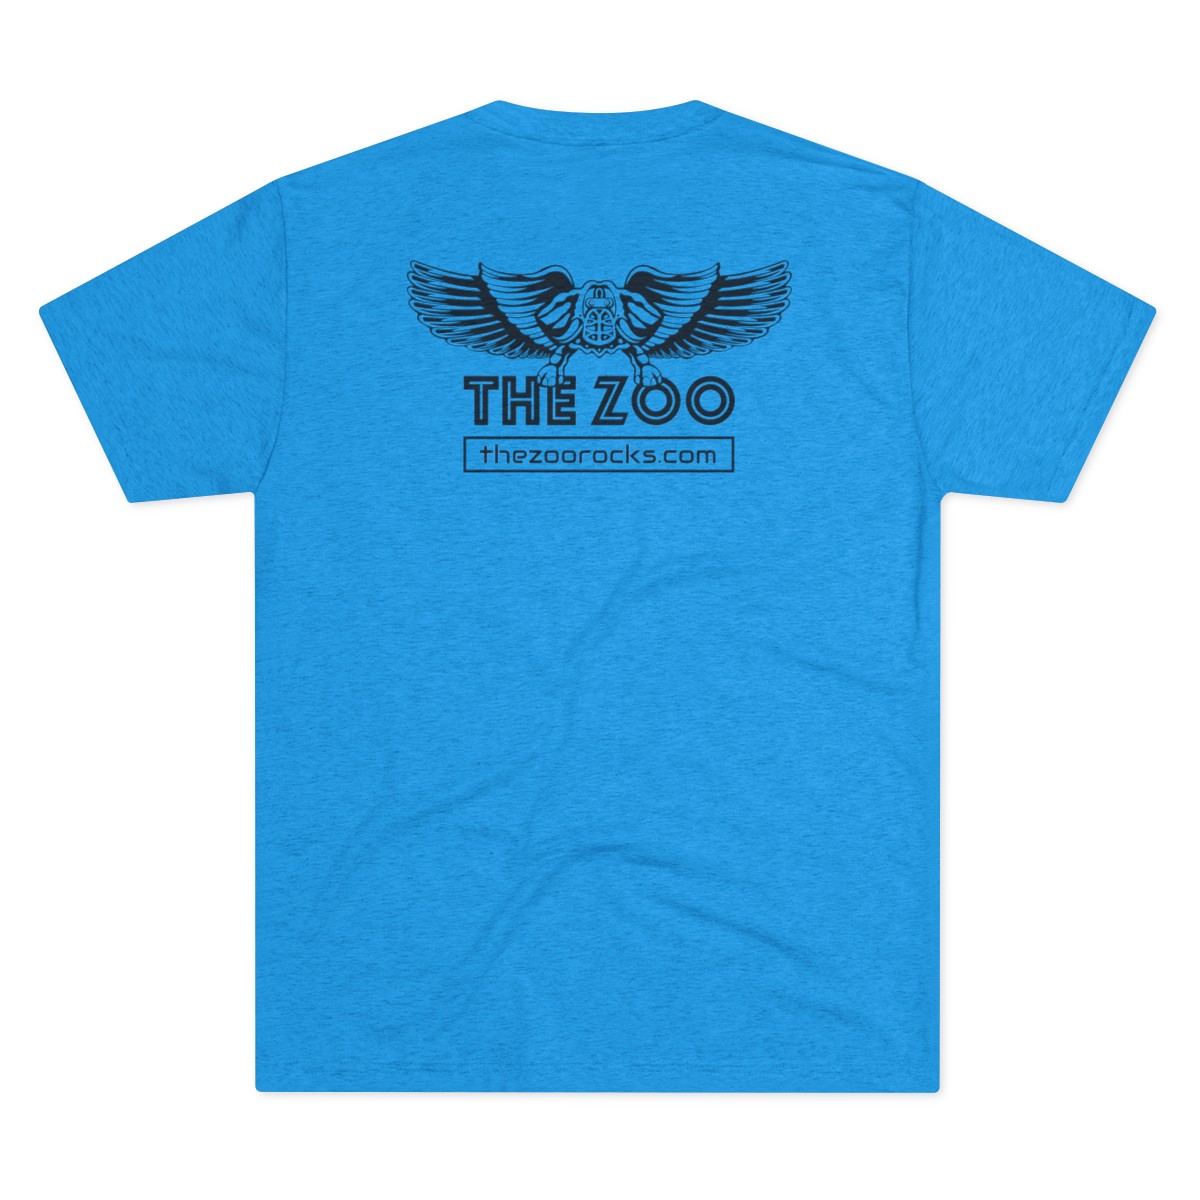 THE ZOO Tri-Blend Crew Tee "Let There Be Rock" product thumbnail image